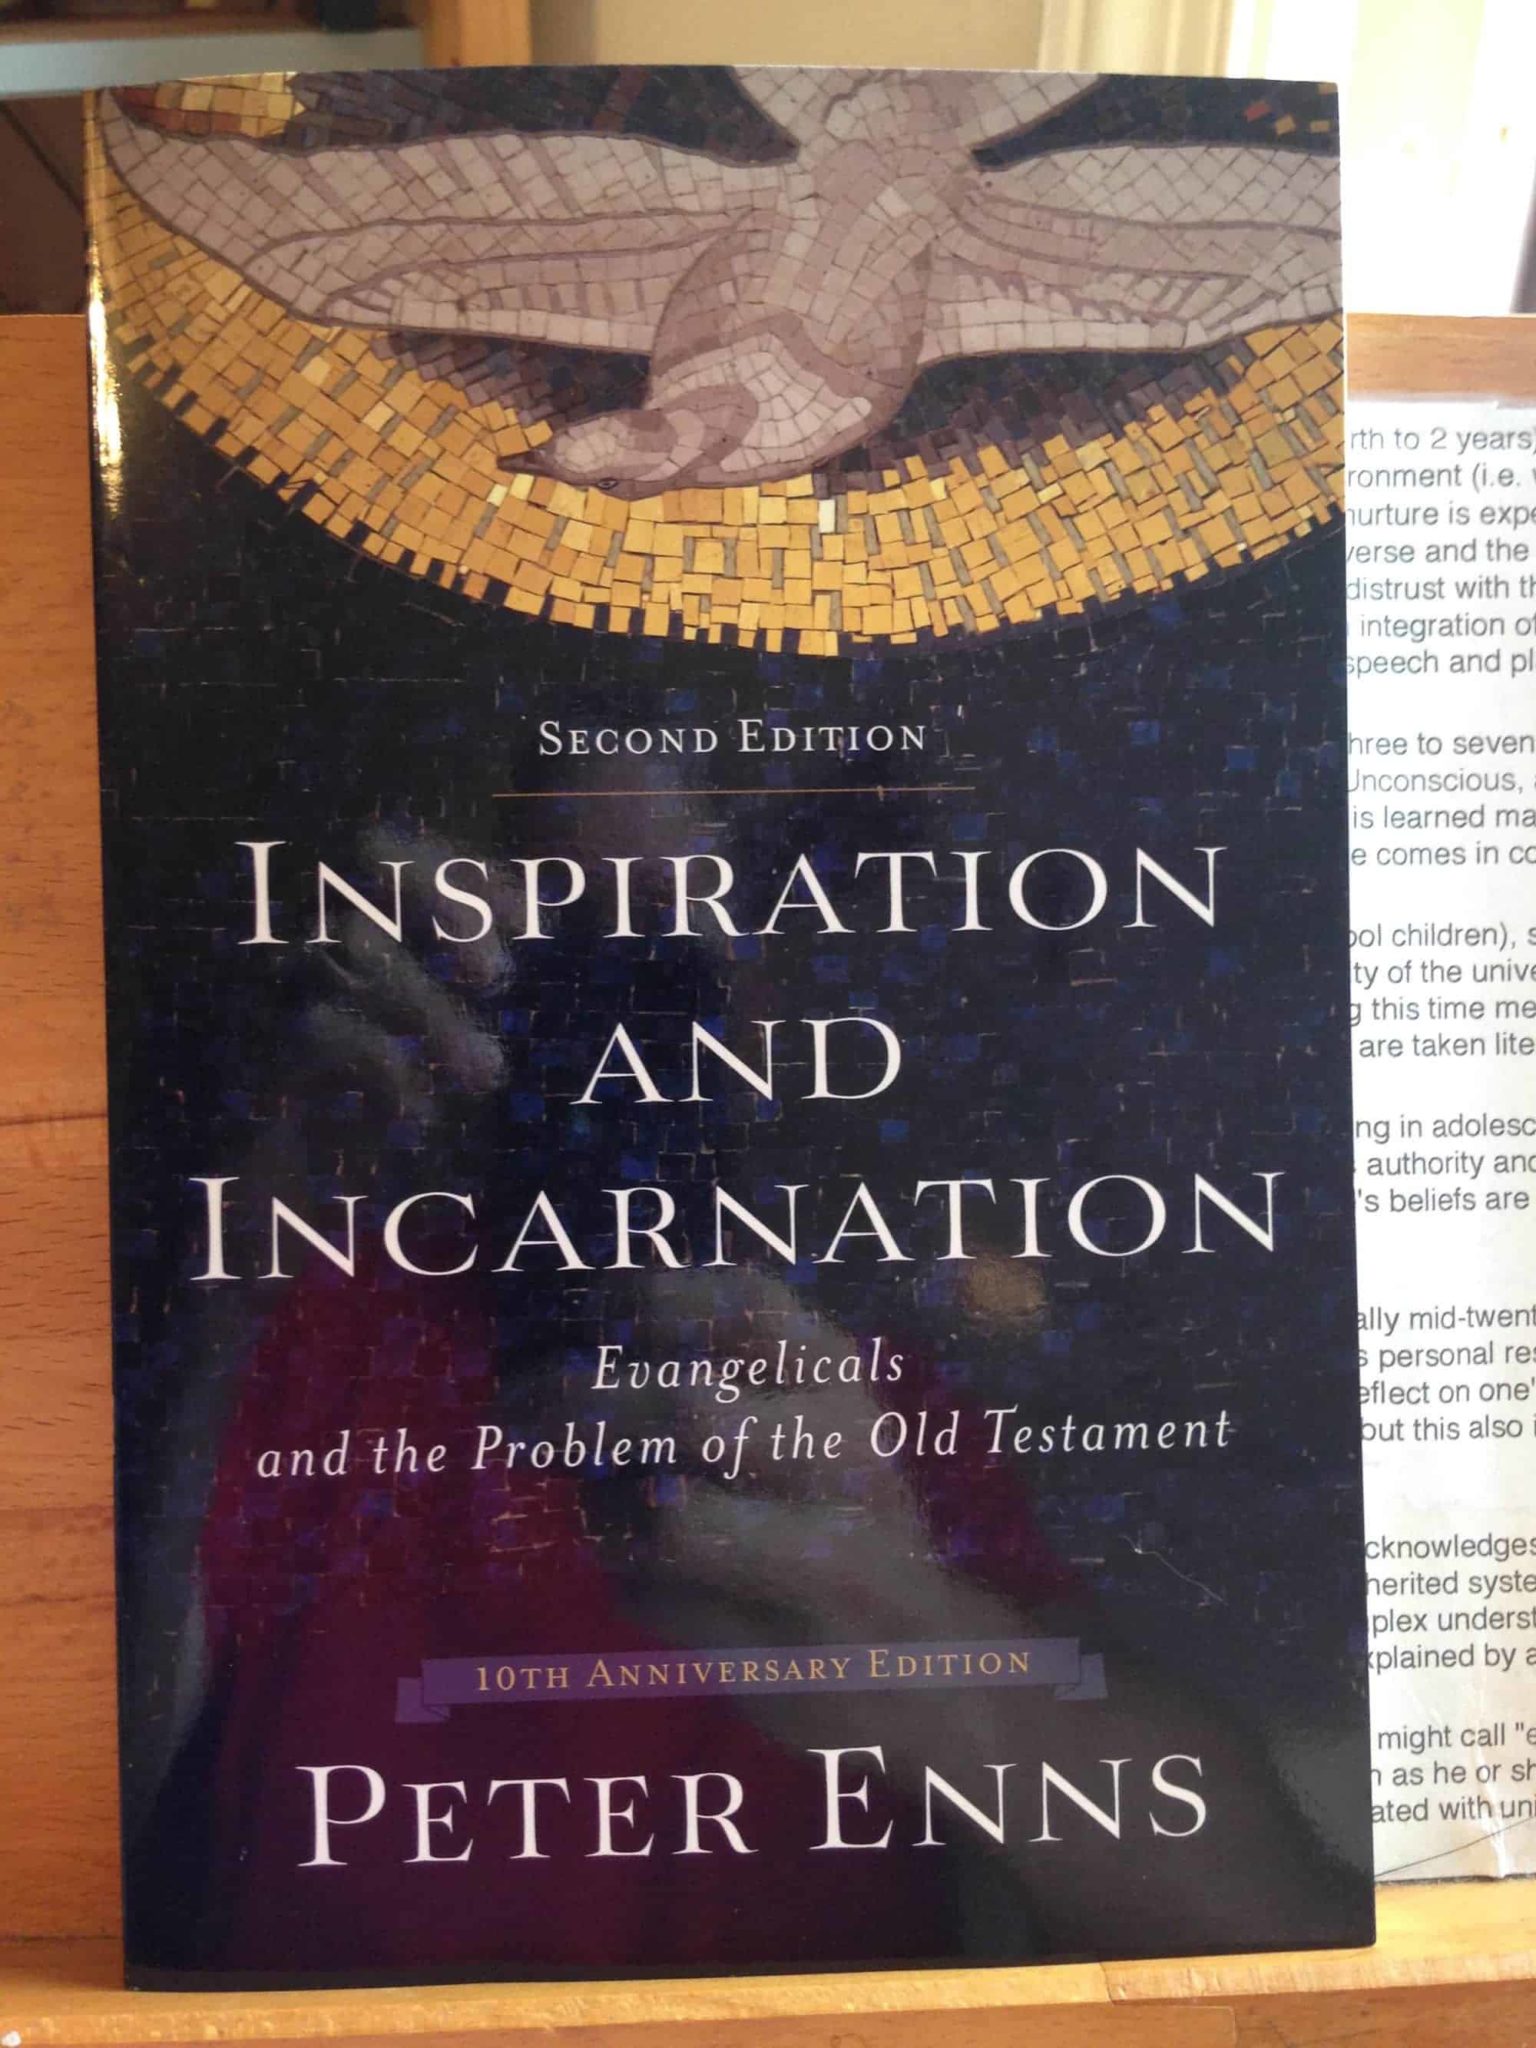 I just got my copy of the 10th anniversary edition of Inspiration and Incarnation. Have you? Jealous?